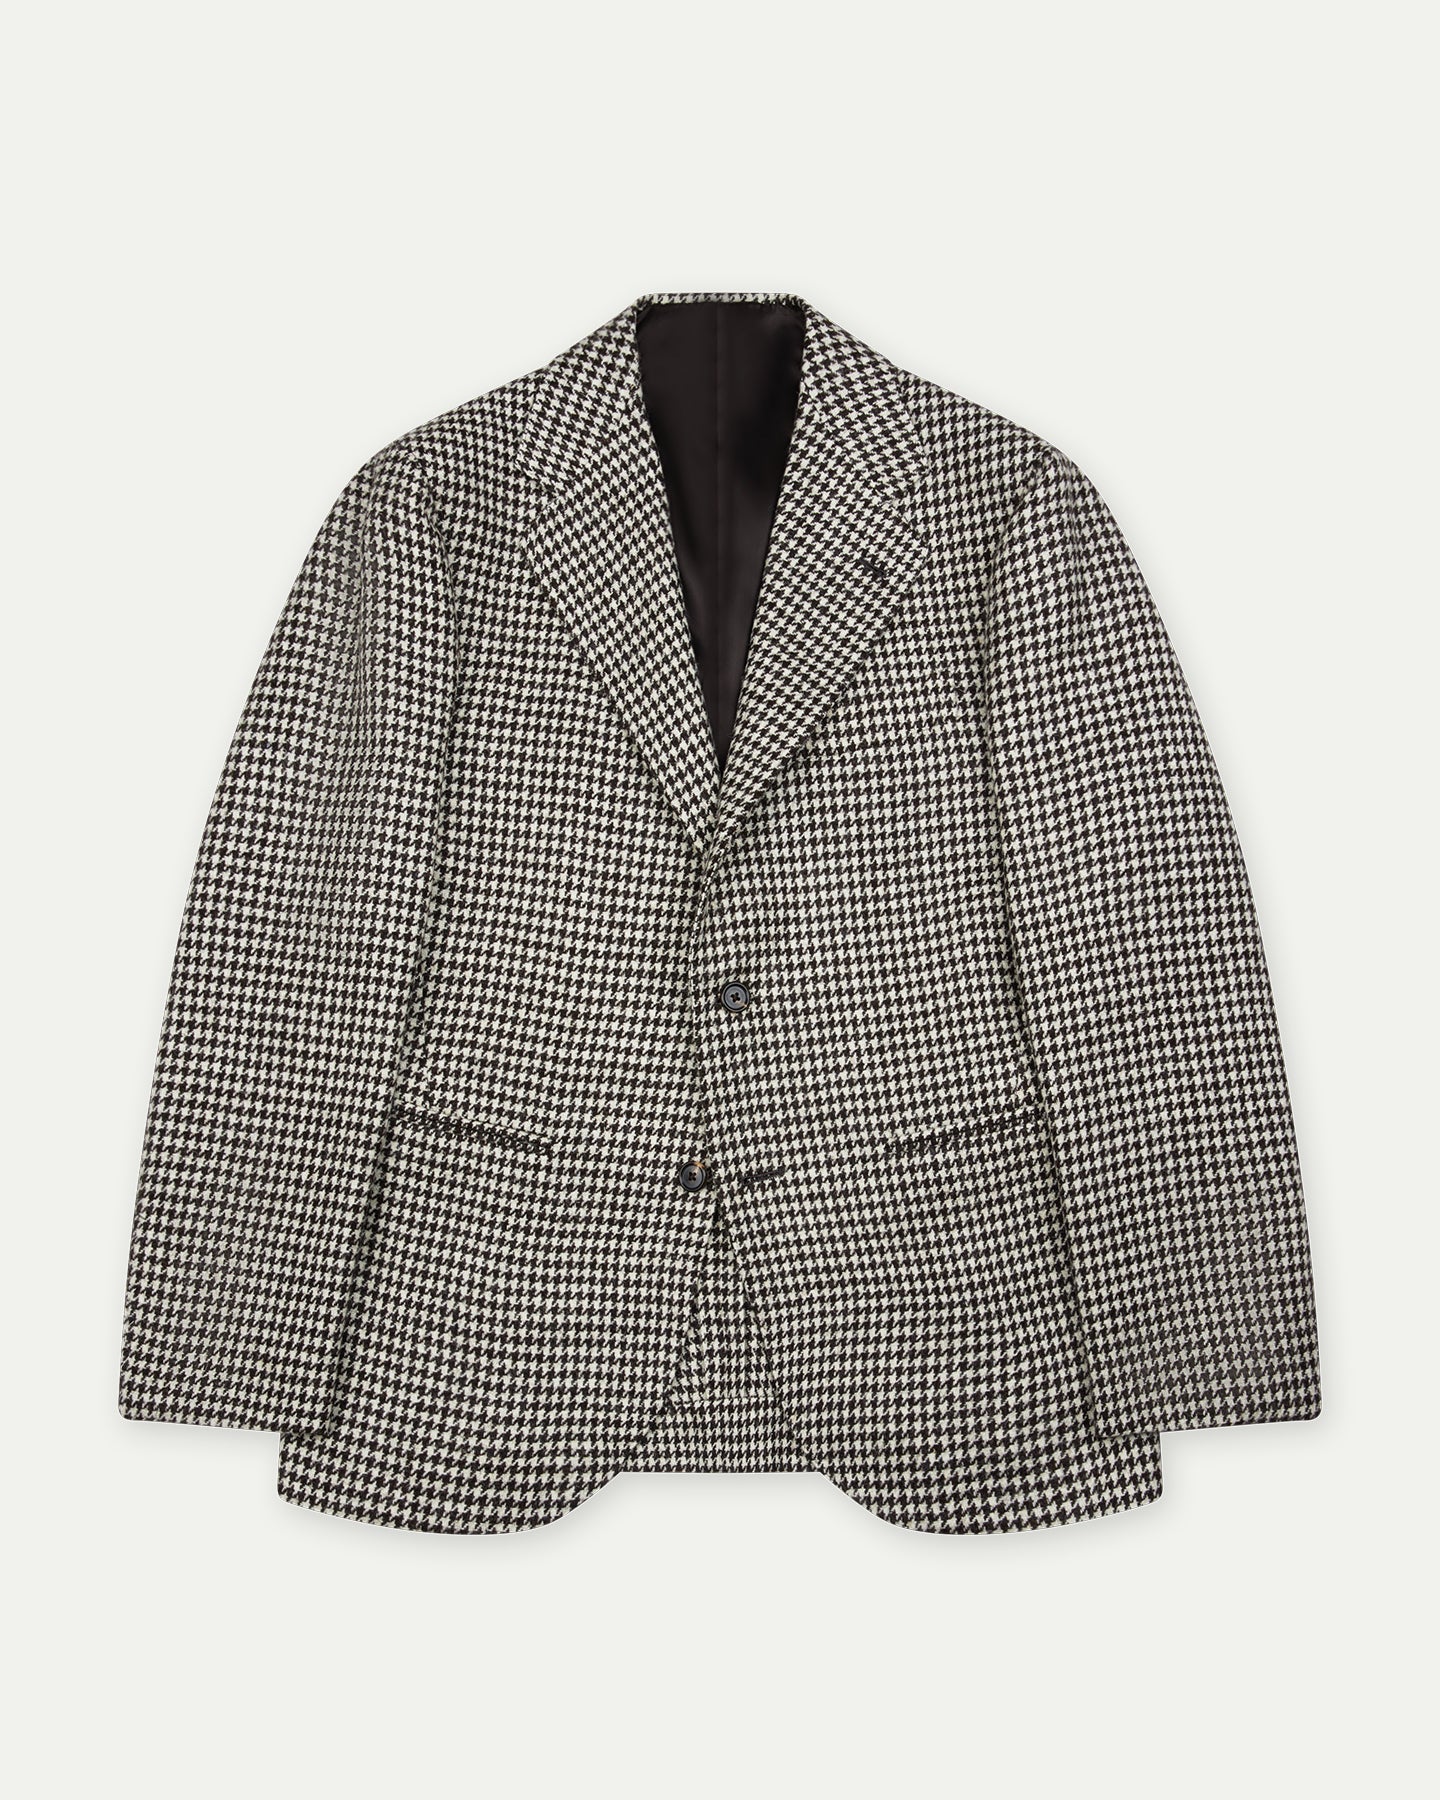 Made-To-Order Black / White Houndstooth Wool Sport Coat